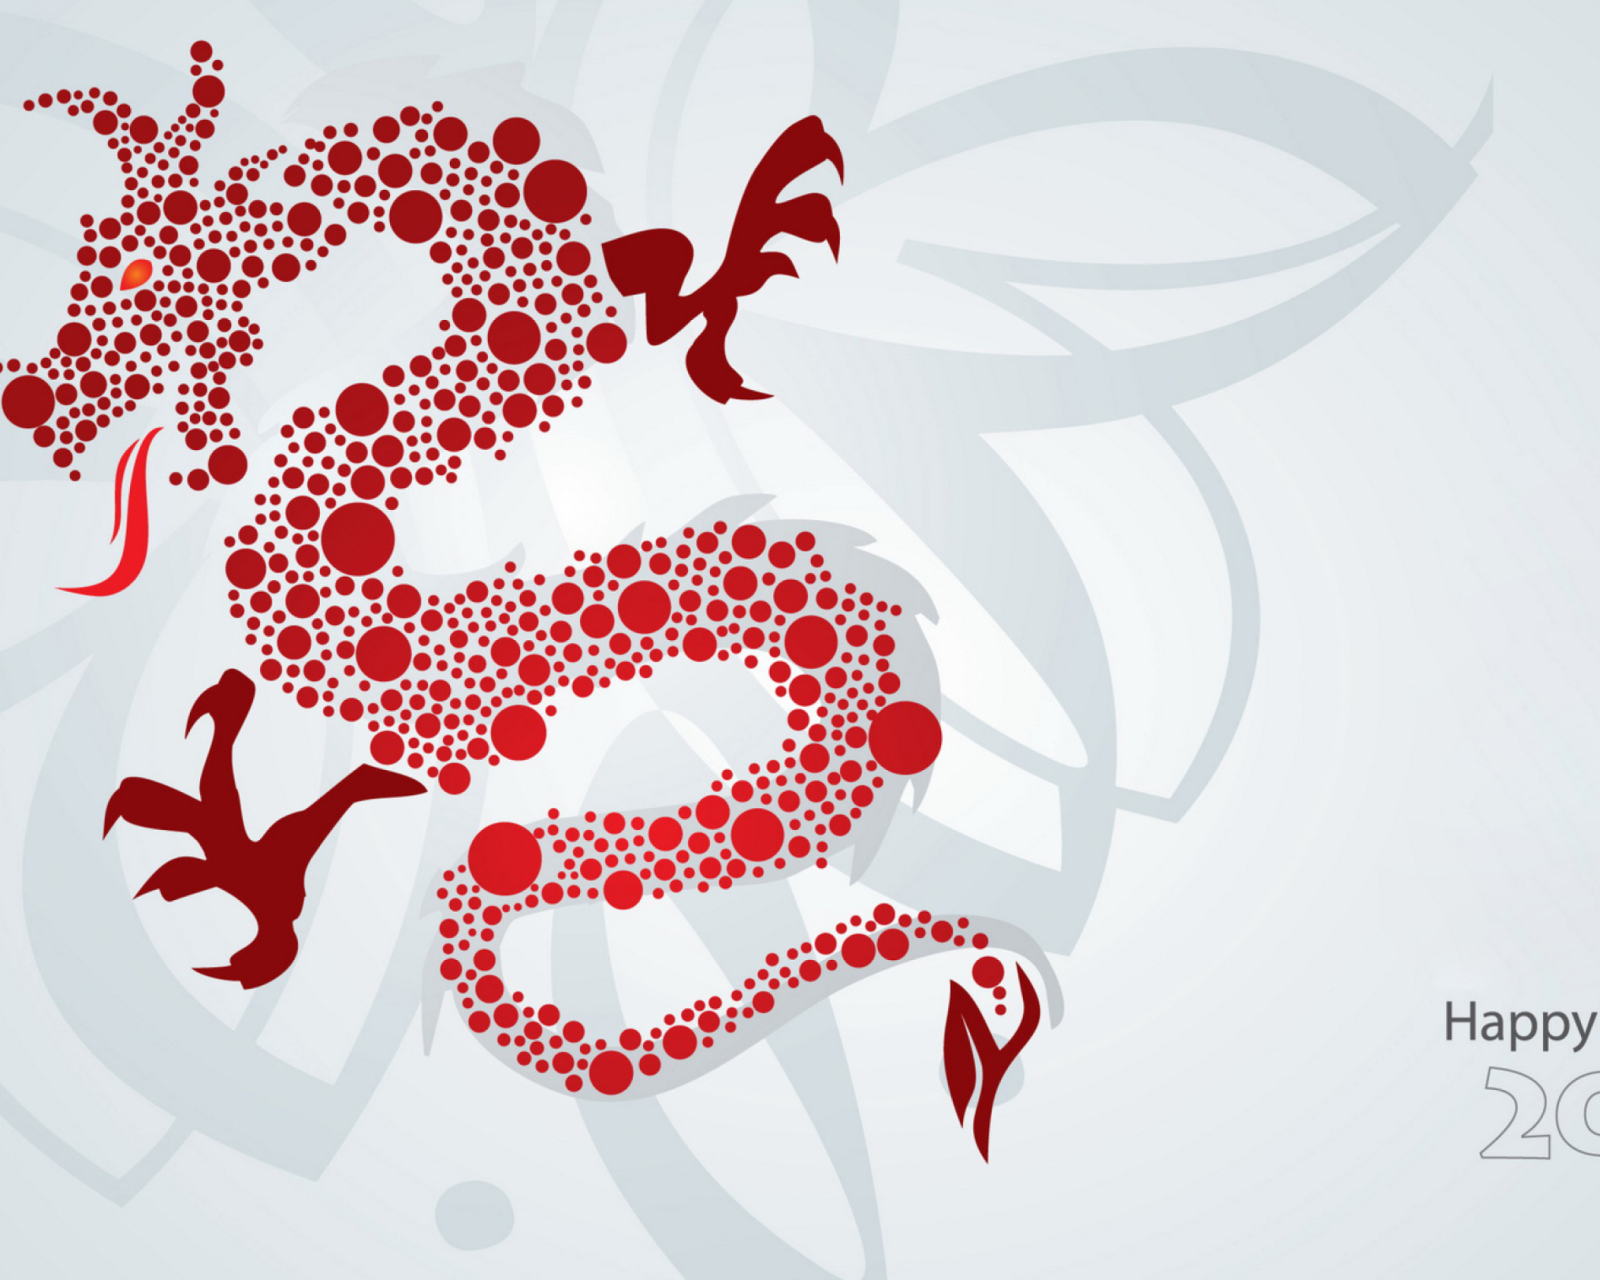 Year Of The Dragon wallpaper 1600x1280